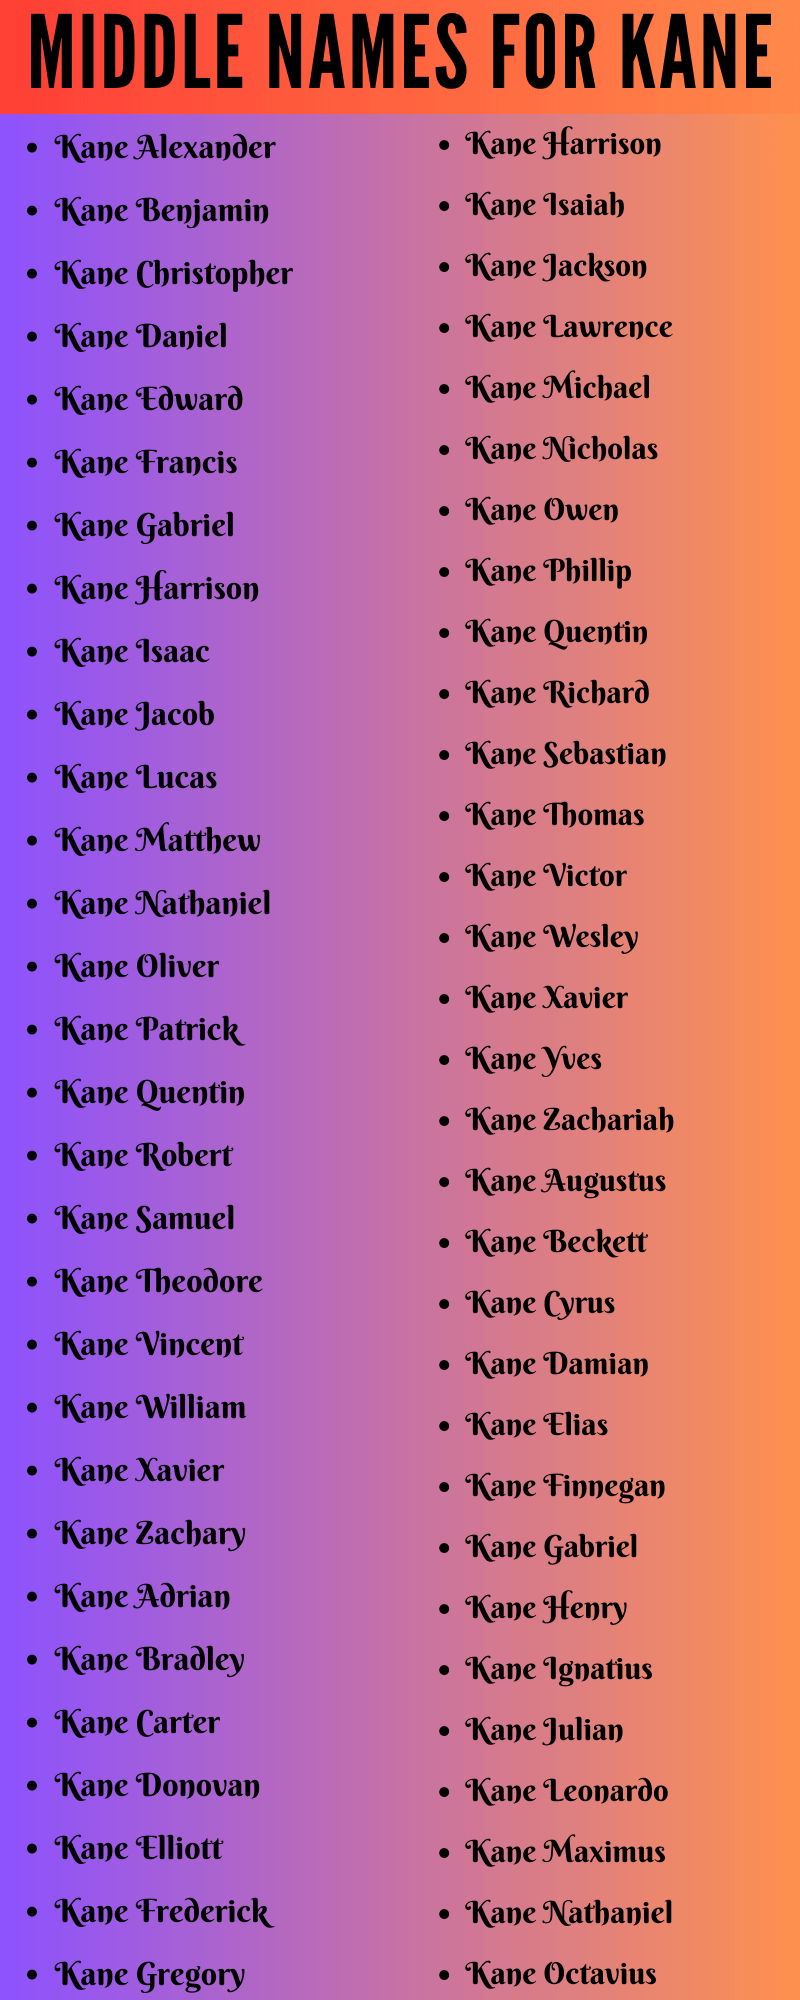 400 Best Middle Names For Kane